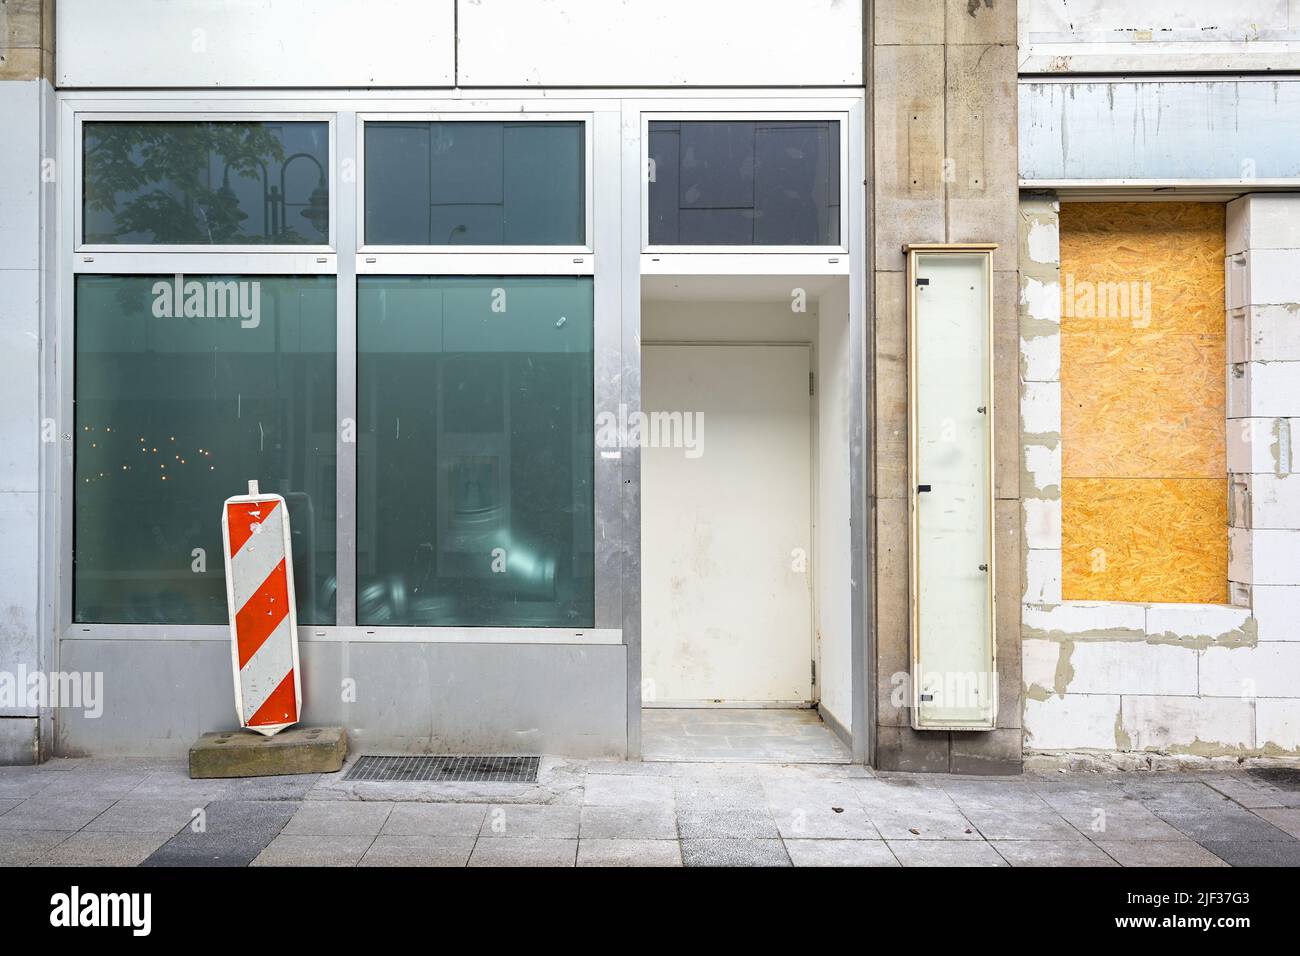 Abandoned city store after insolvency in the economic crisis due to coronavirus and inflation, renovation for a new start, copy space, selected focus Stock Photo